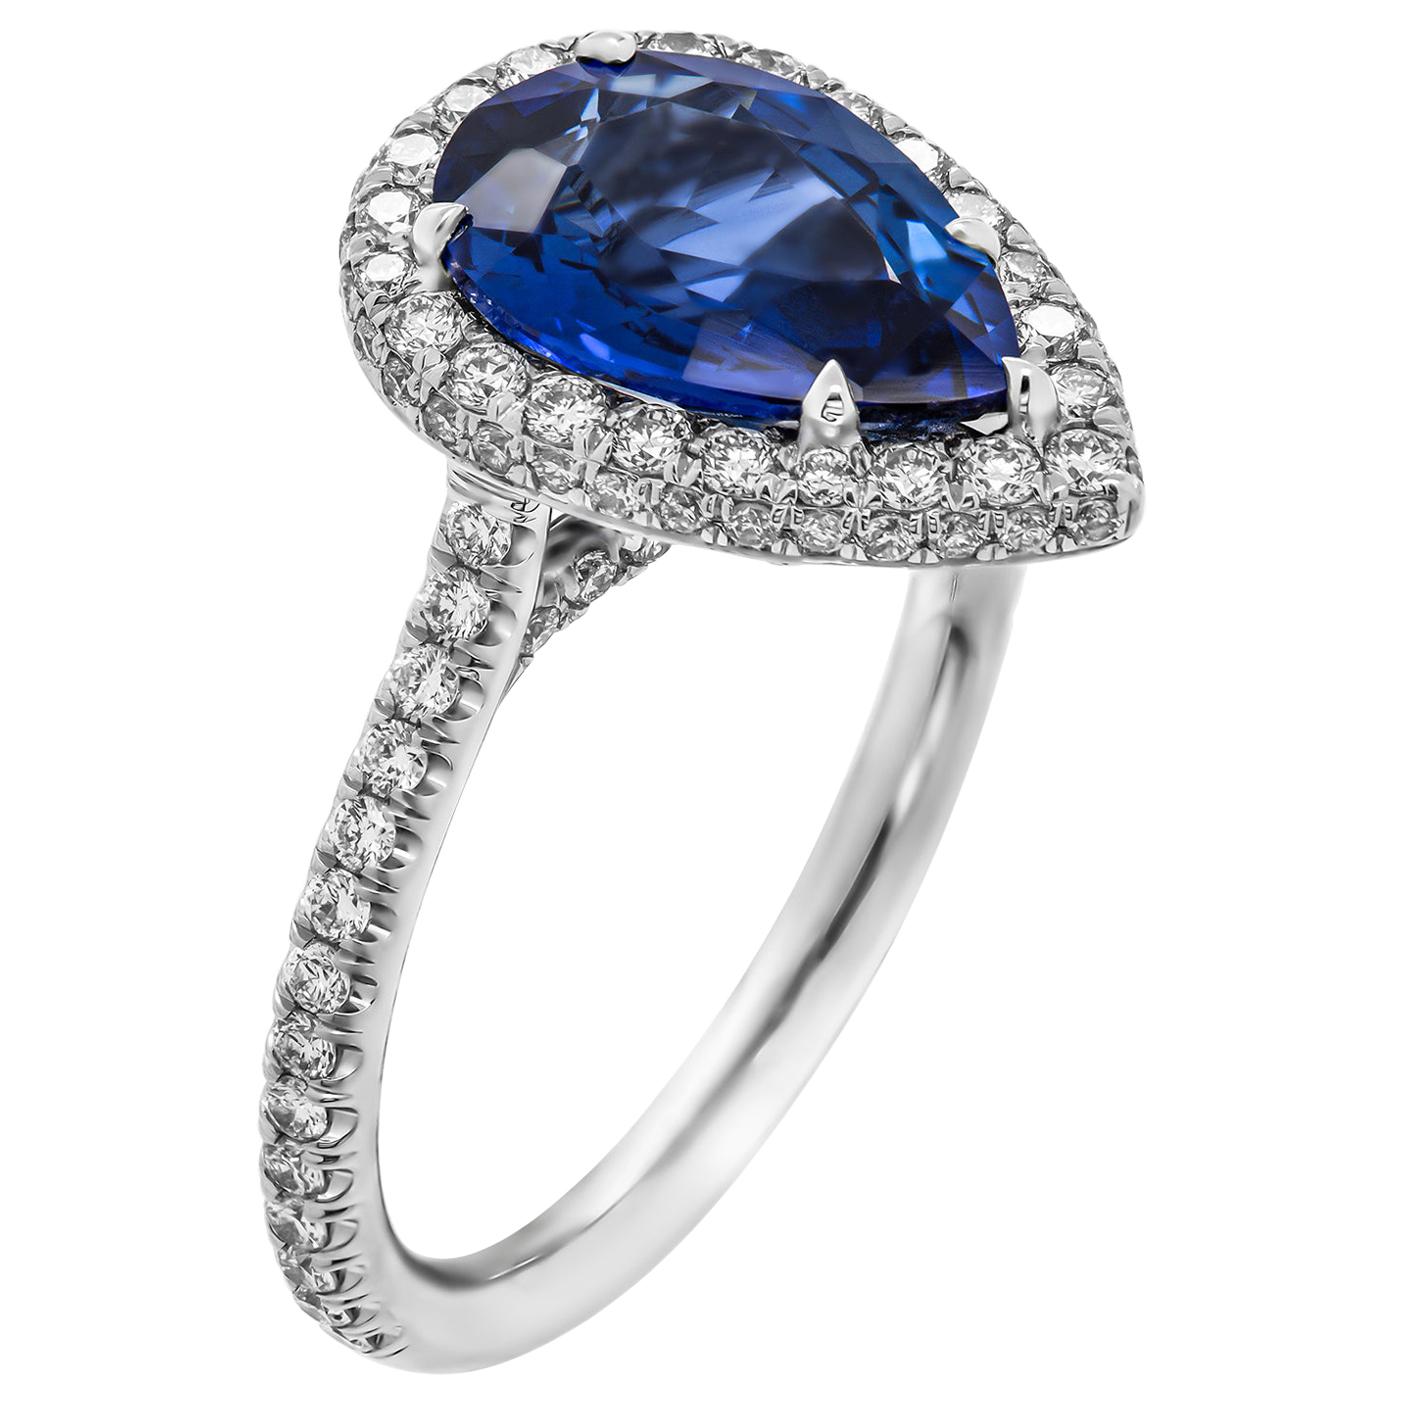 GIA Certified Platinum Cocktail Ring with 2.54 Carat Pear Shape Blue Sapphire